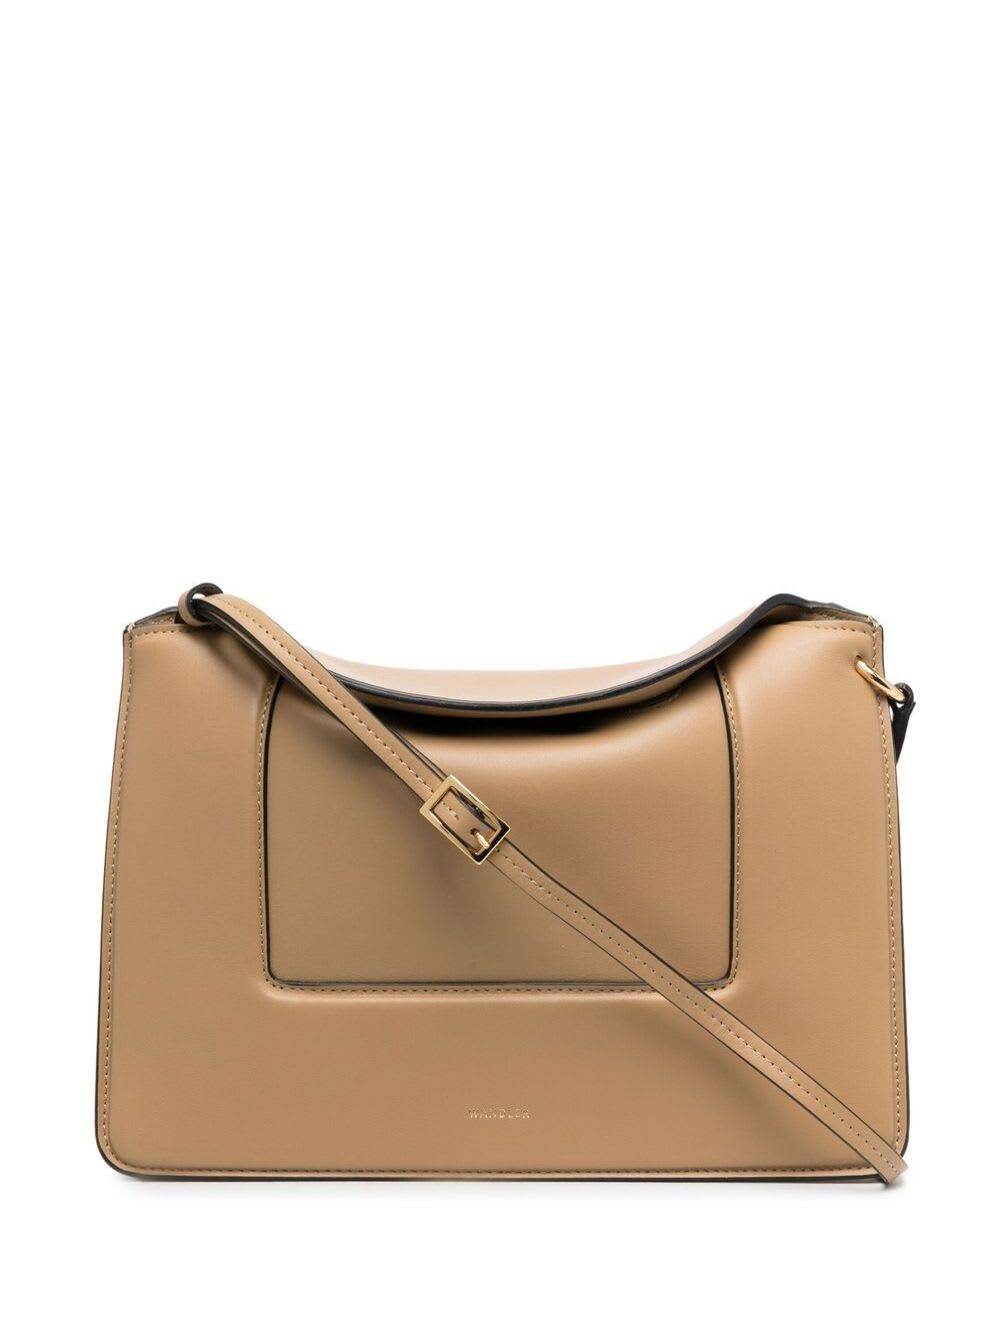 Wandler Beige Shoulder Bag In Calf Leather With Gold-colored Details Woman